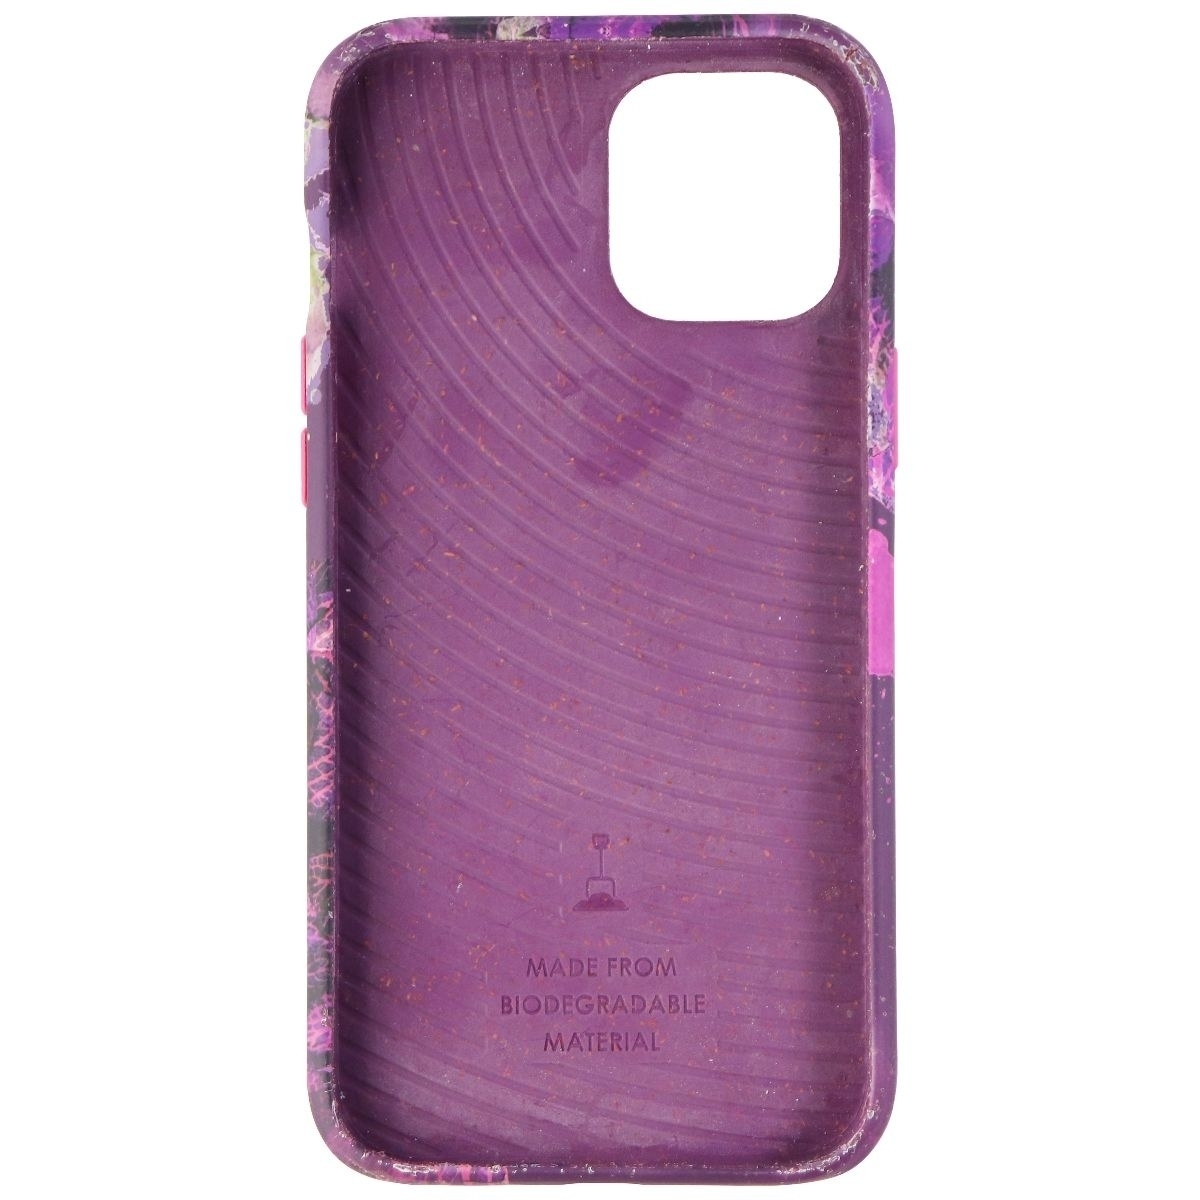 Tech21 EcoArt Smooth Gel Case For Apple IPhone 12 Pro Max - Pink/Purple